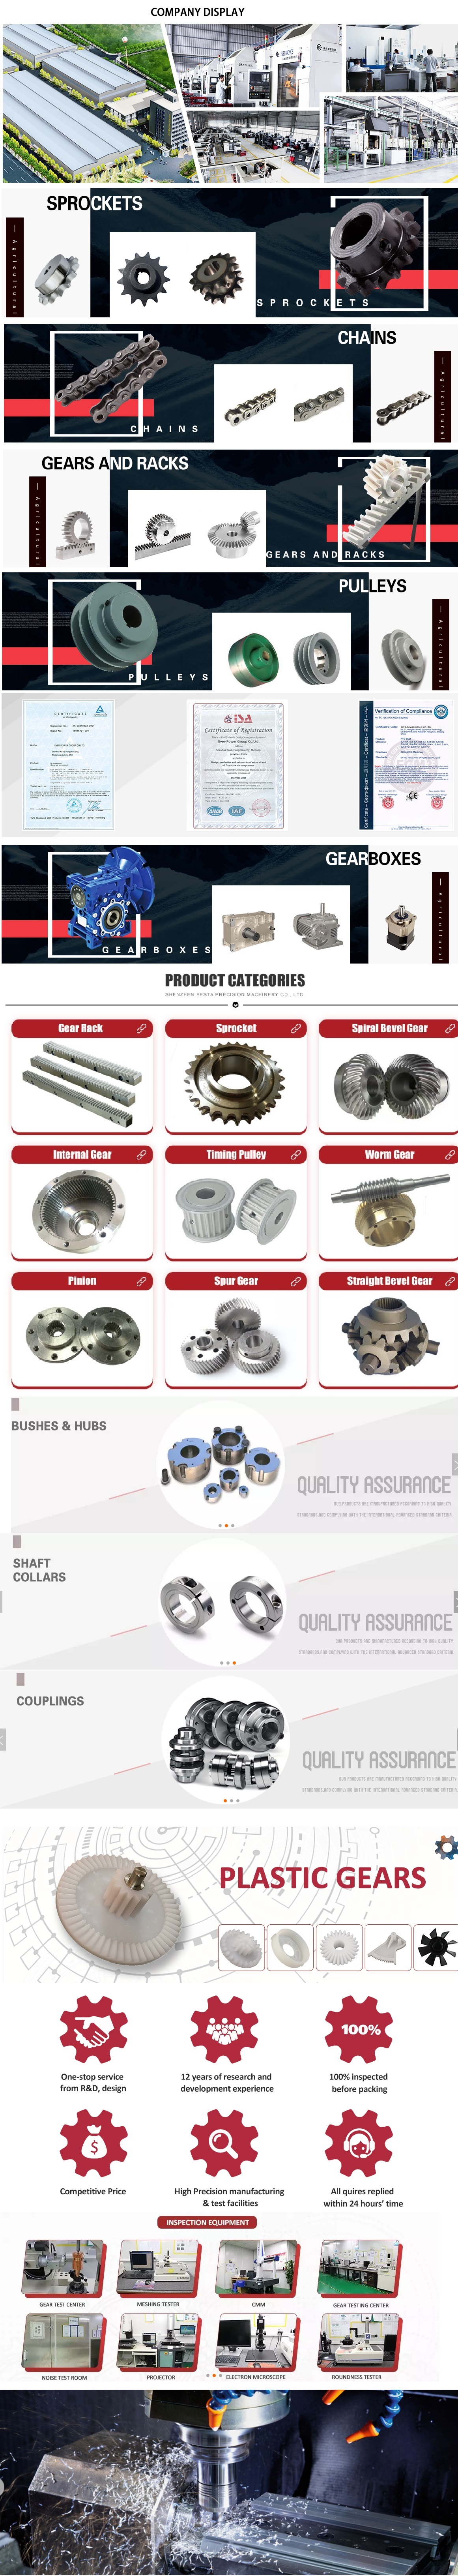   in Udaipur India  sales   price   shop   near me   near me shop   factory   supplier Carbon and Stainless Steel Roller Chain Sprocket Gear manufacturer   best   Cost   Custom   Cheap   wholesaler 